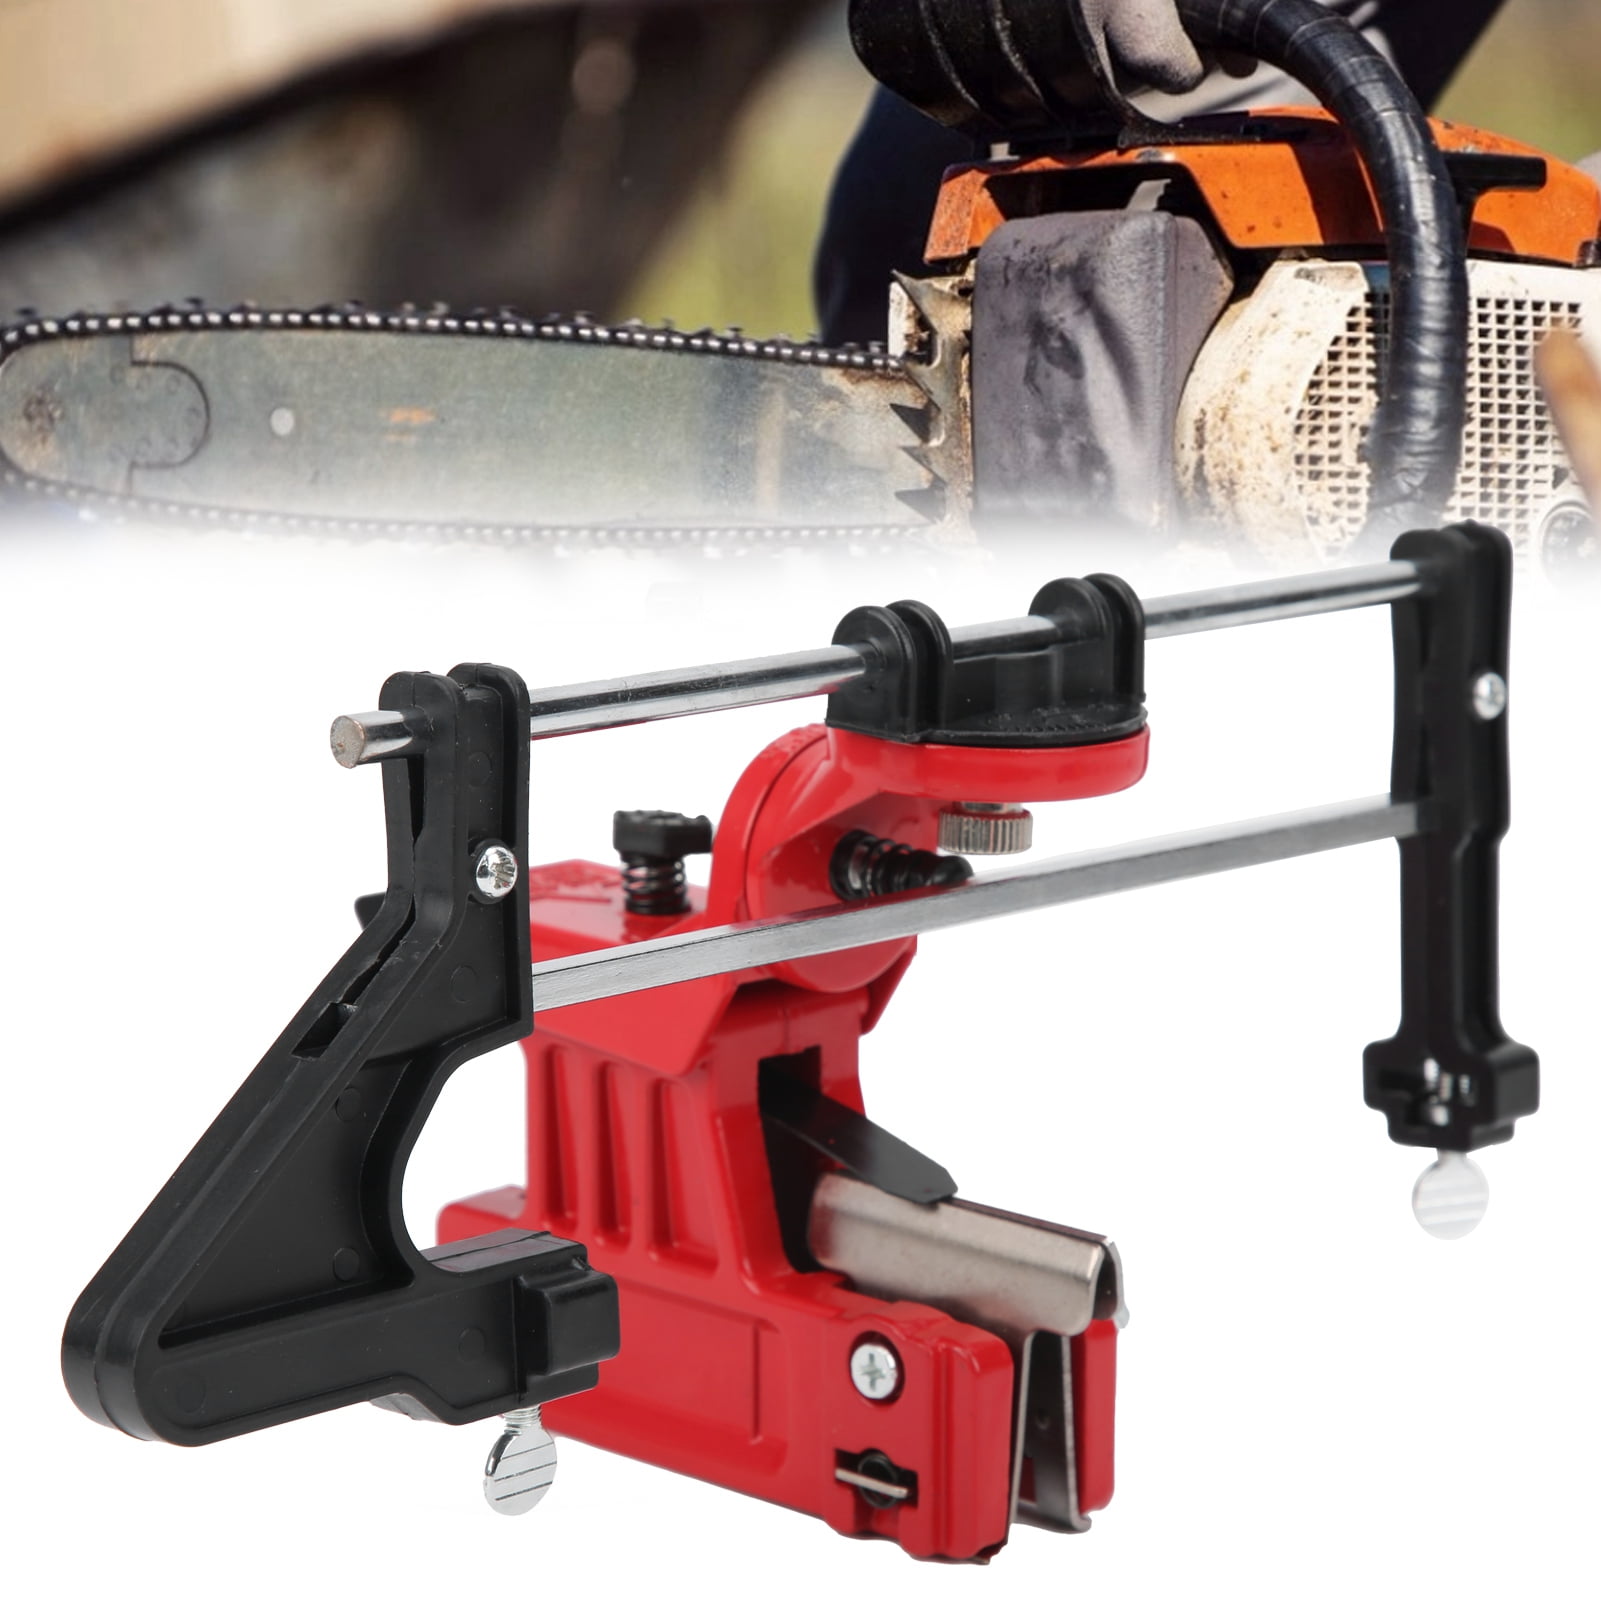 NEW BBT CHAINSAW CLAMP ON SHARPNER KIT FITS HUSQVARNA AND MANY BRANDS 